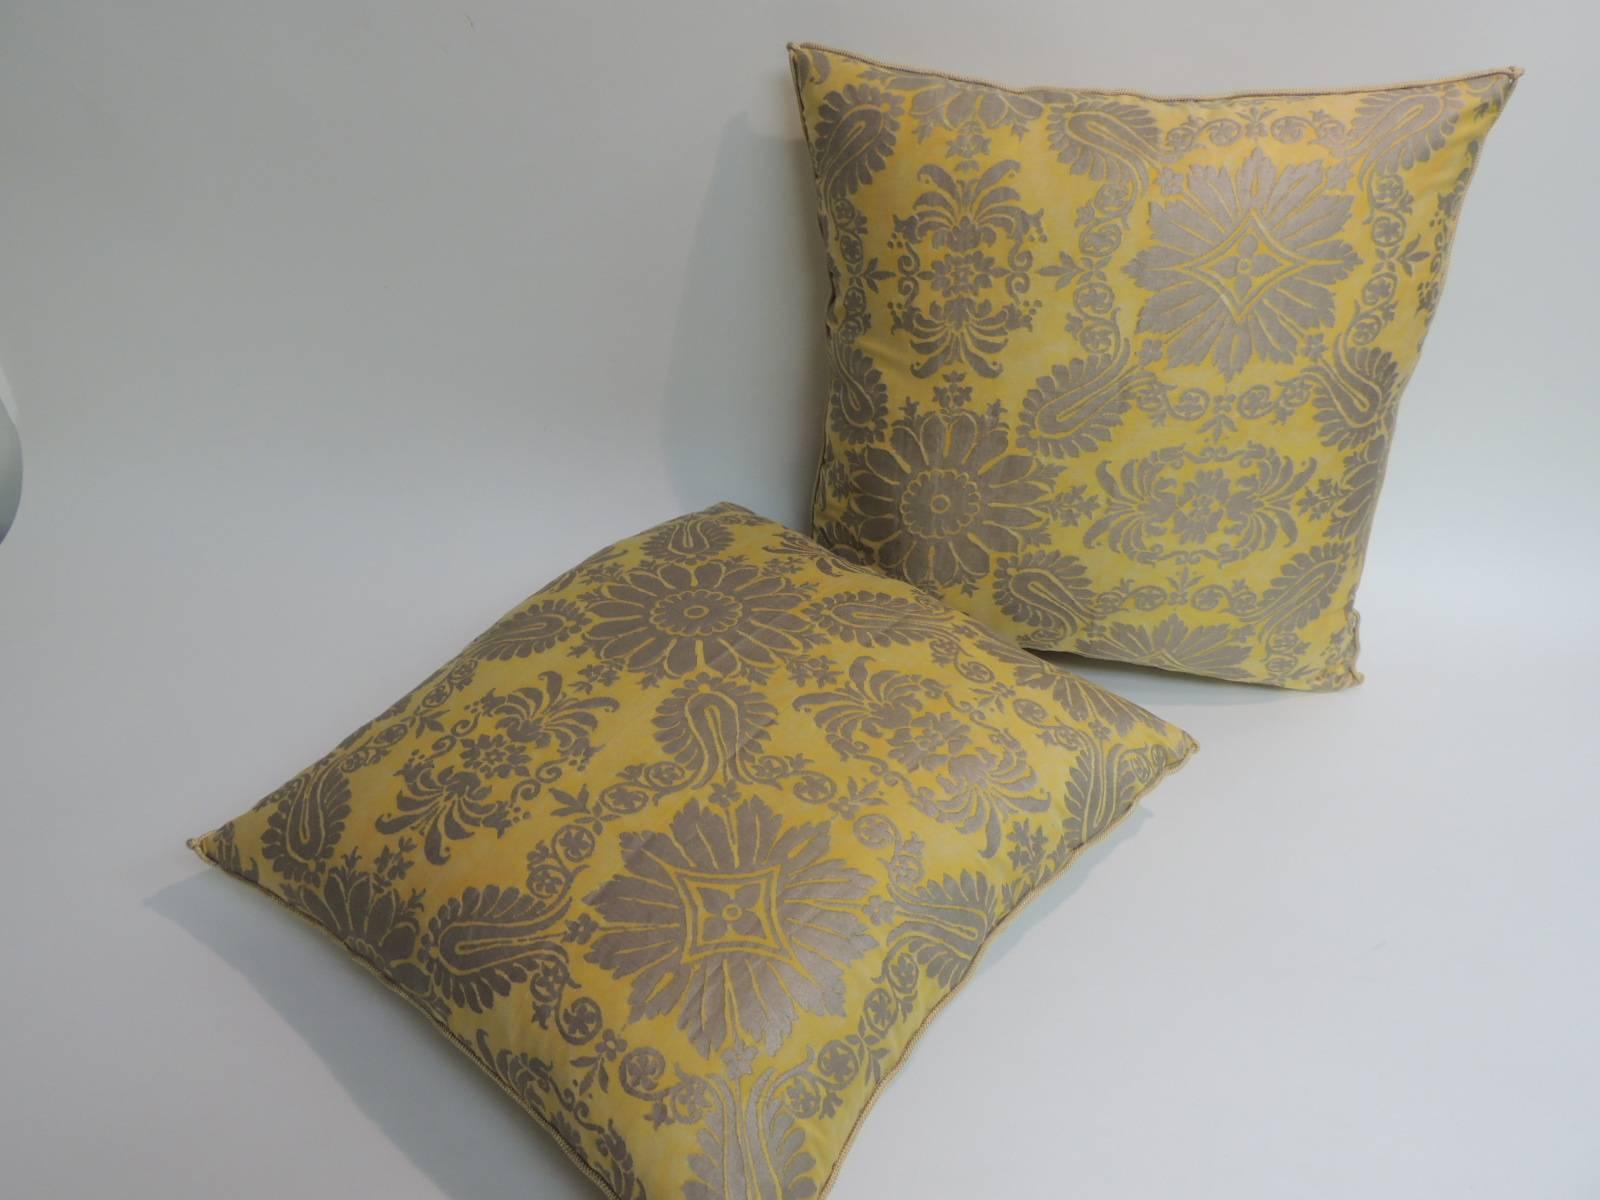 Pair of vintage floral Fortuny decorative pillows imperio pattern yellow and gold with gold silk backings and decorative rope trim all around.
Decorative pillow handcrafted and designed in the USA. Closure by stitch (no zipper closure) with